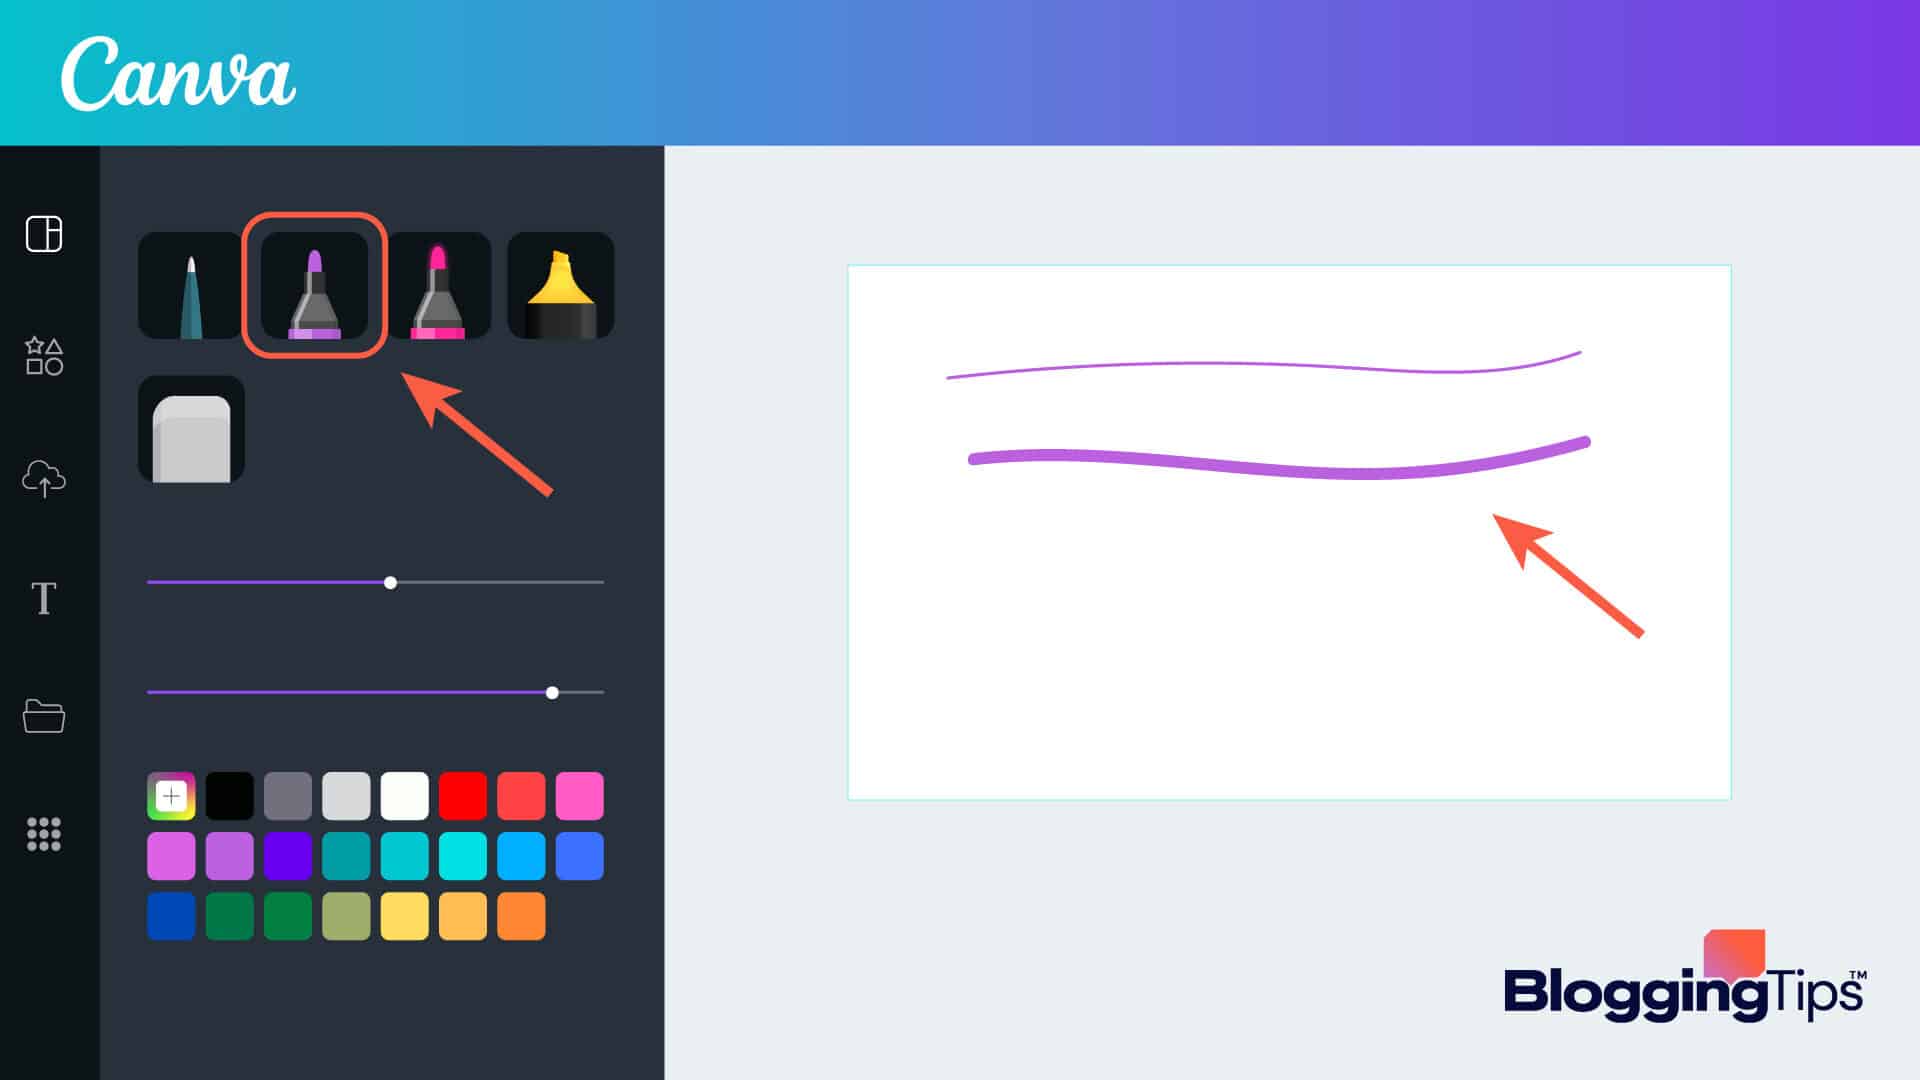 vector graphic showing an illustration of how to draw on canva